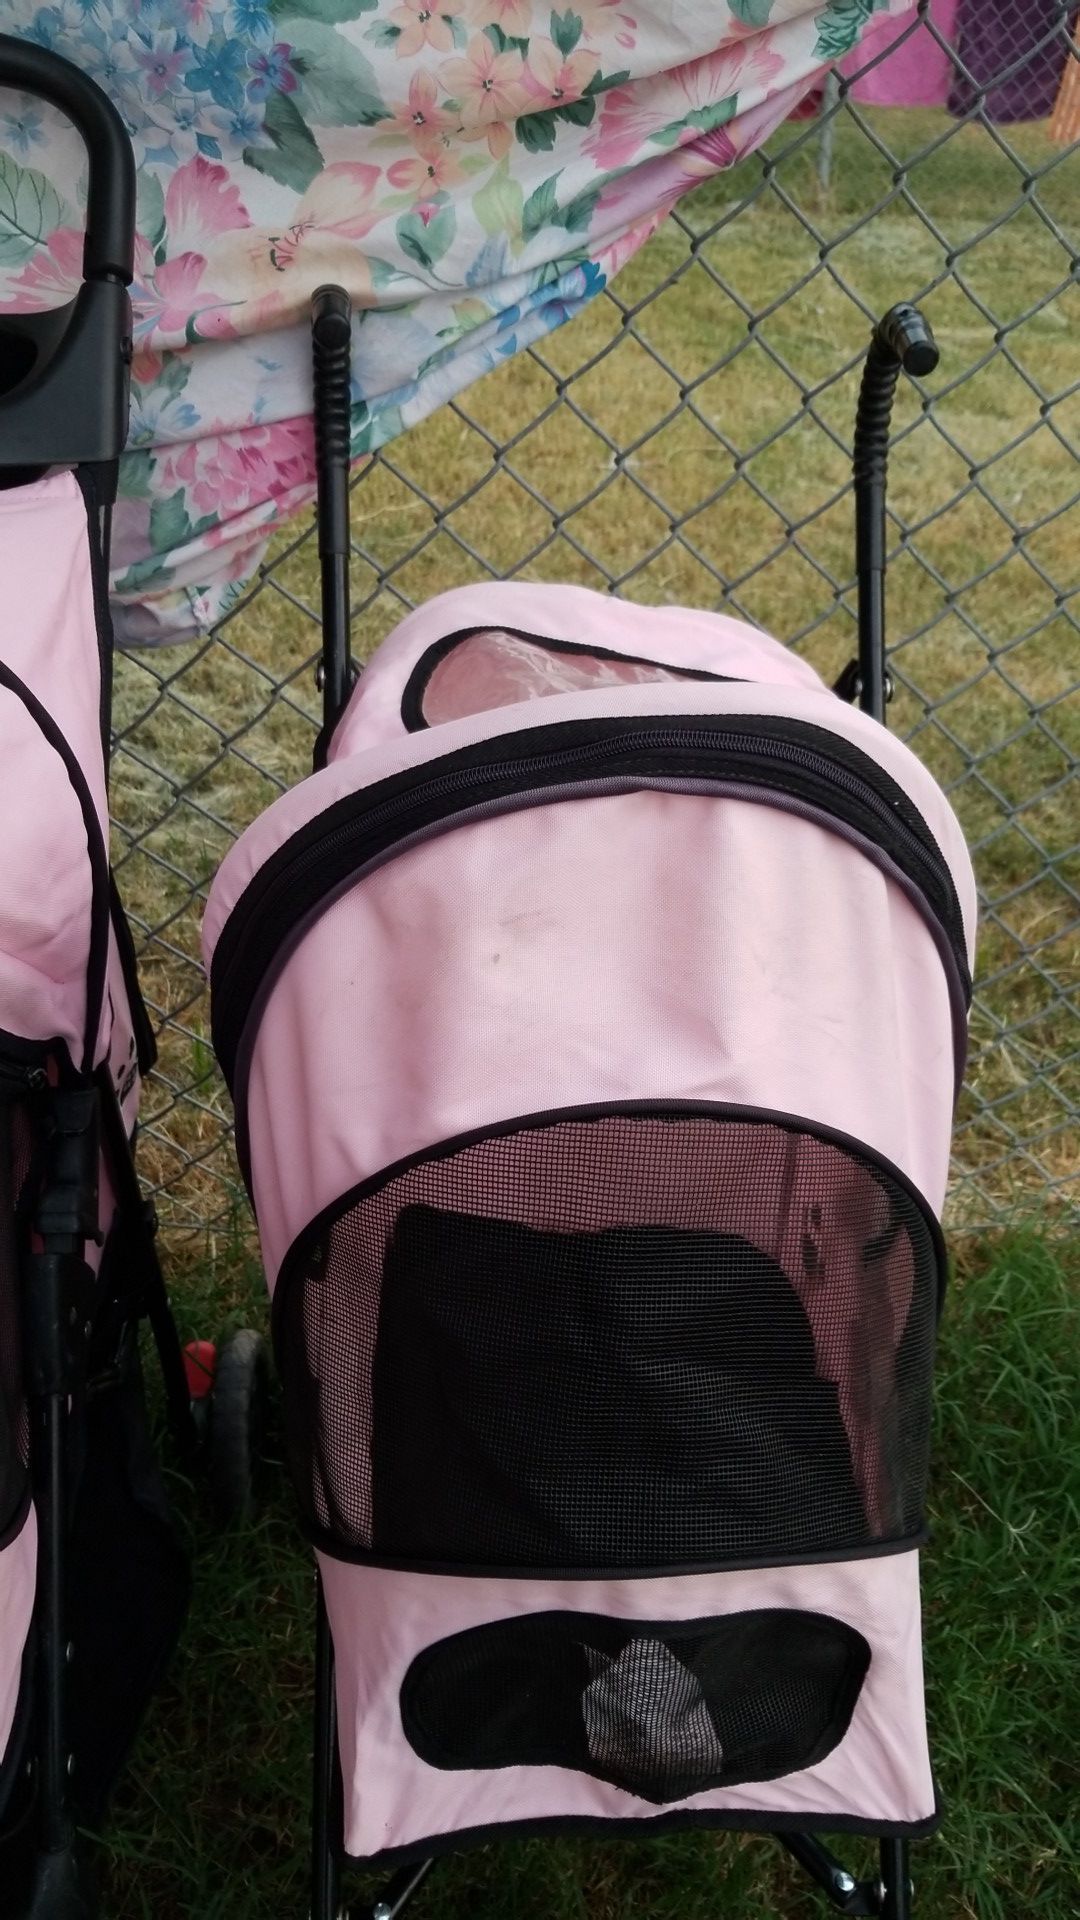 a stroller for dogs